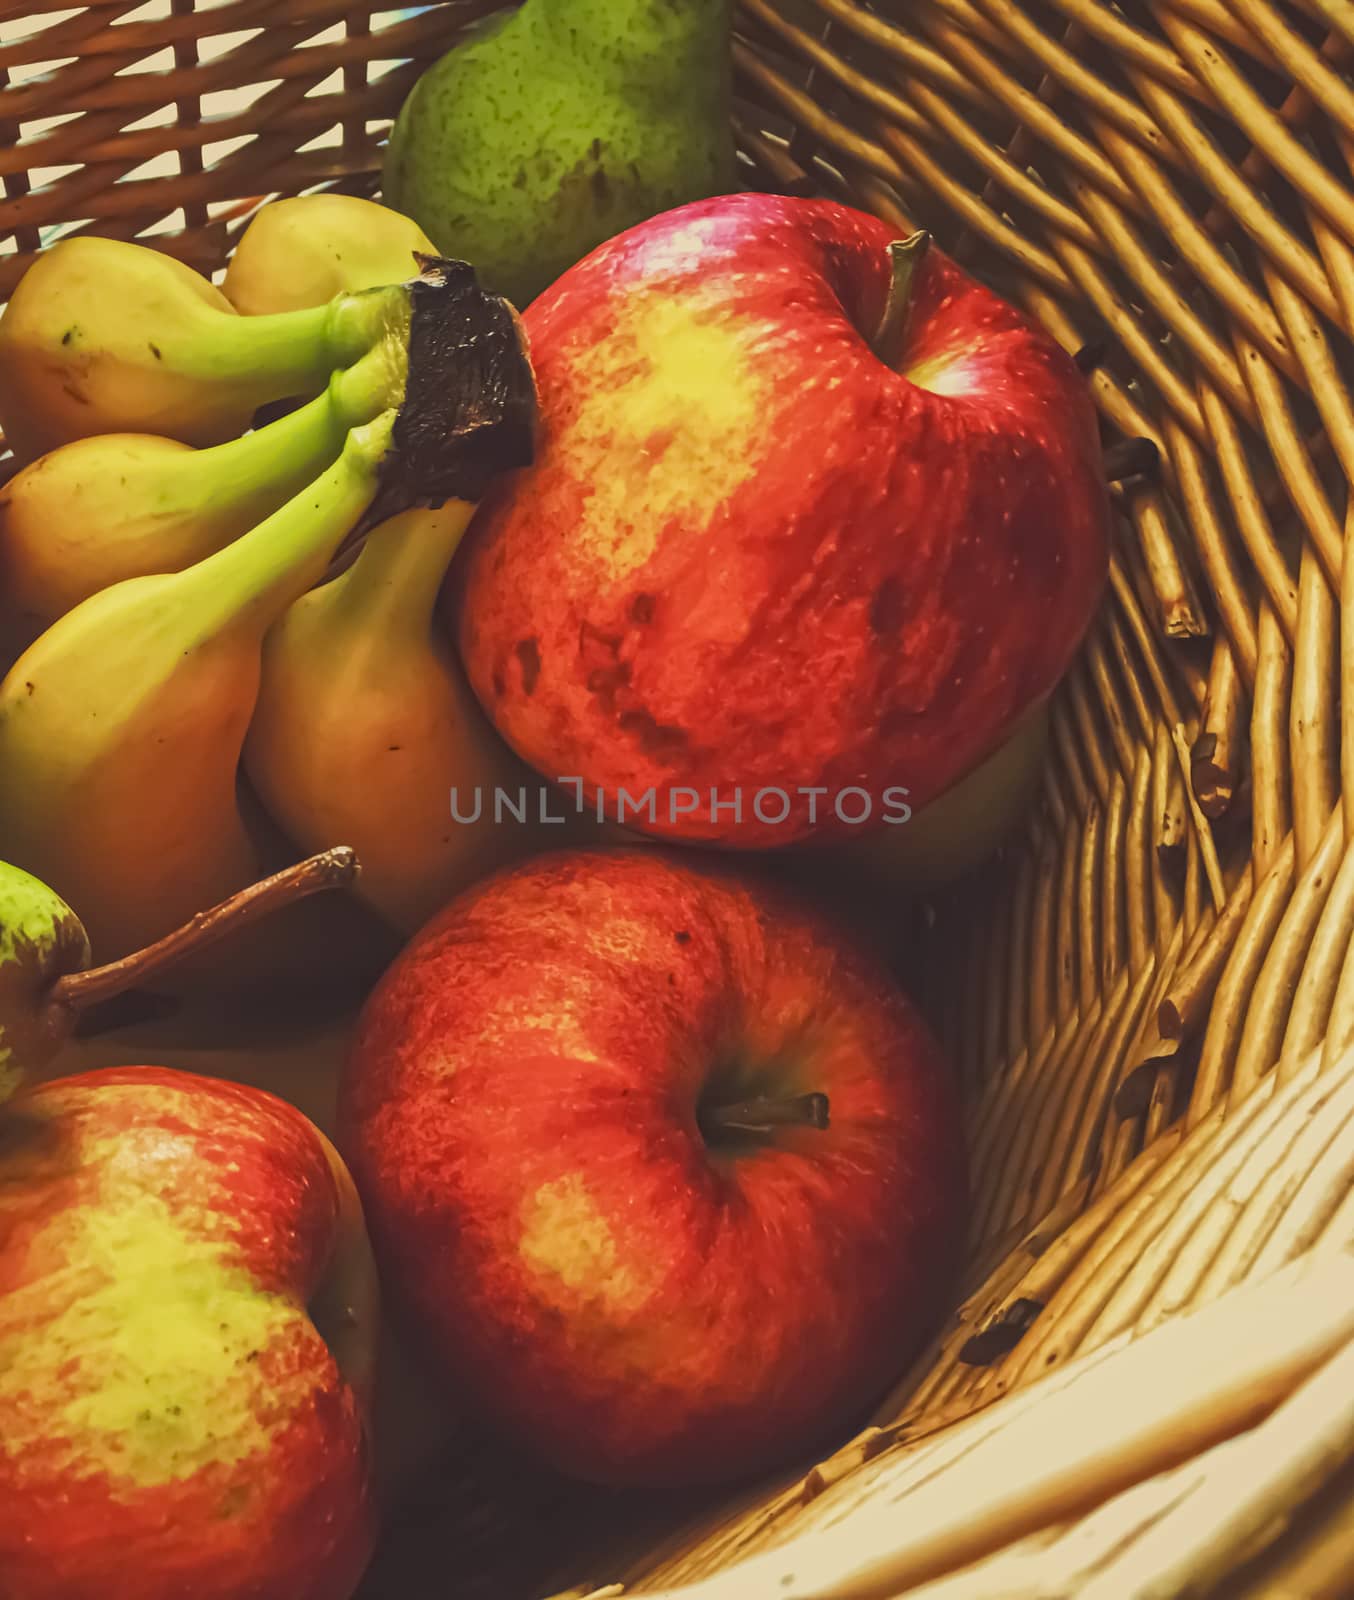 Organic apples, pears and bananas on rustic in a wicker basket, fruits farming and agriculture